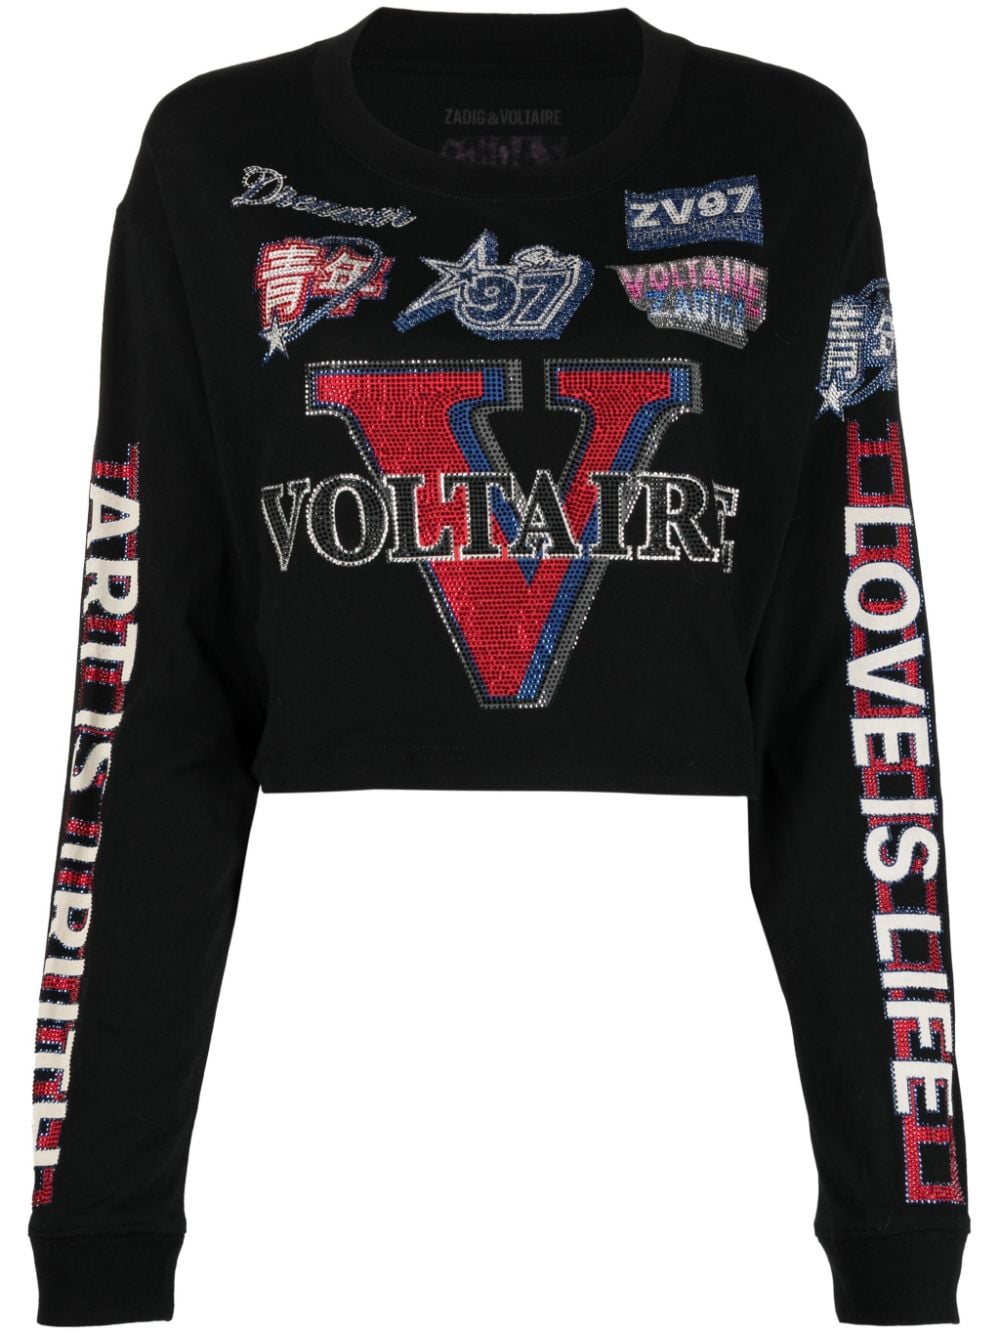 ZADIG & VOLTAIRE IONA VOLTAIRE CROPPED LONG-SLEEVE T-SHIRT